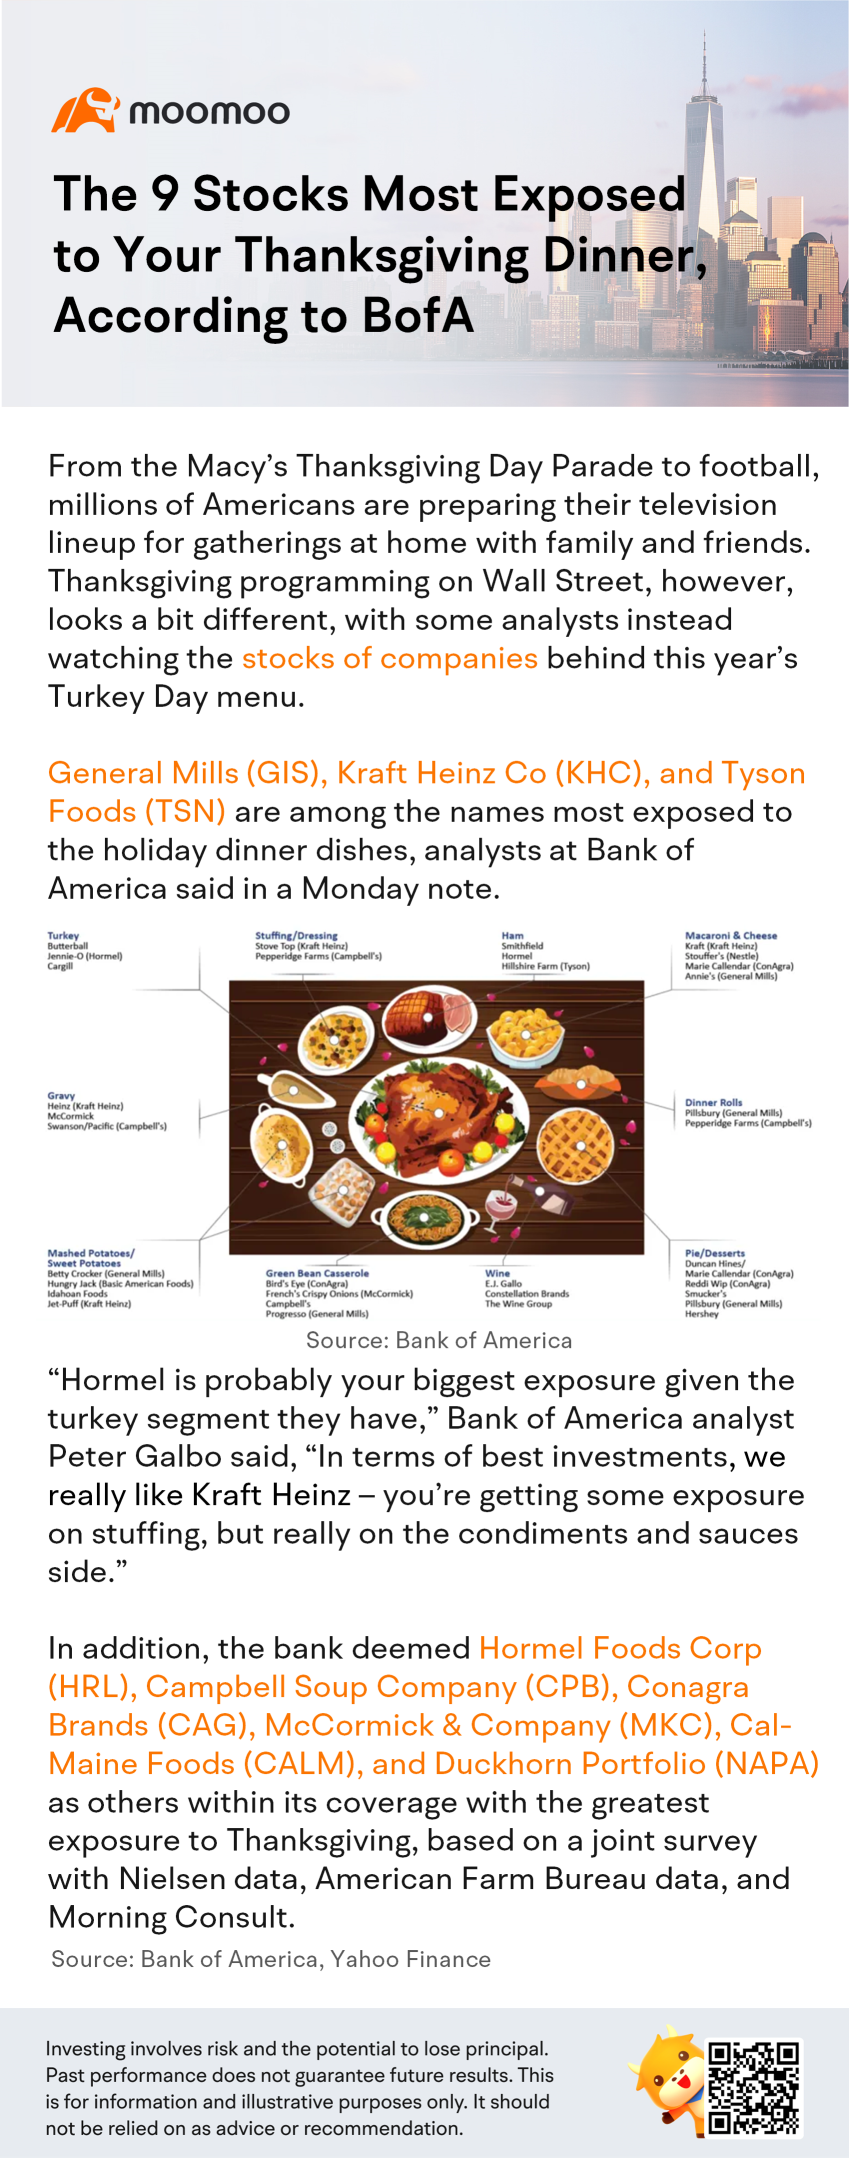 The 9 Stocks Most Exposed to Your Thanksgiving Dinner, According to BofA